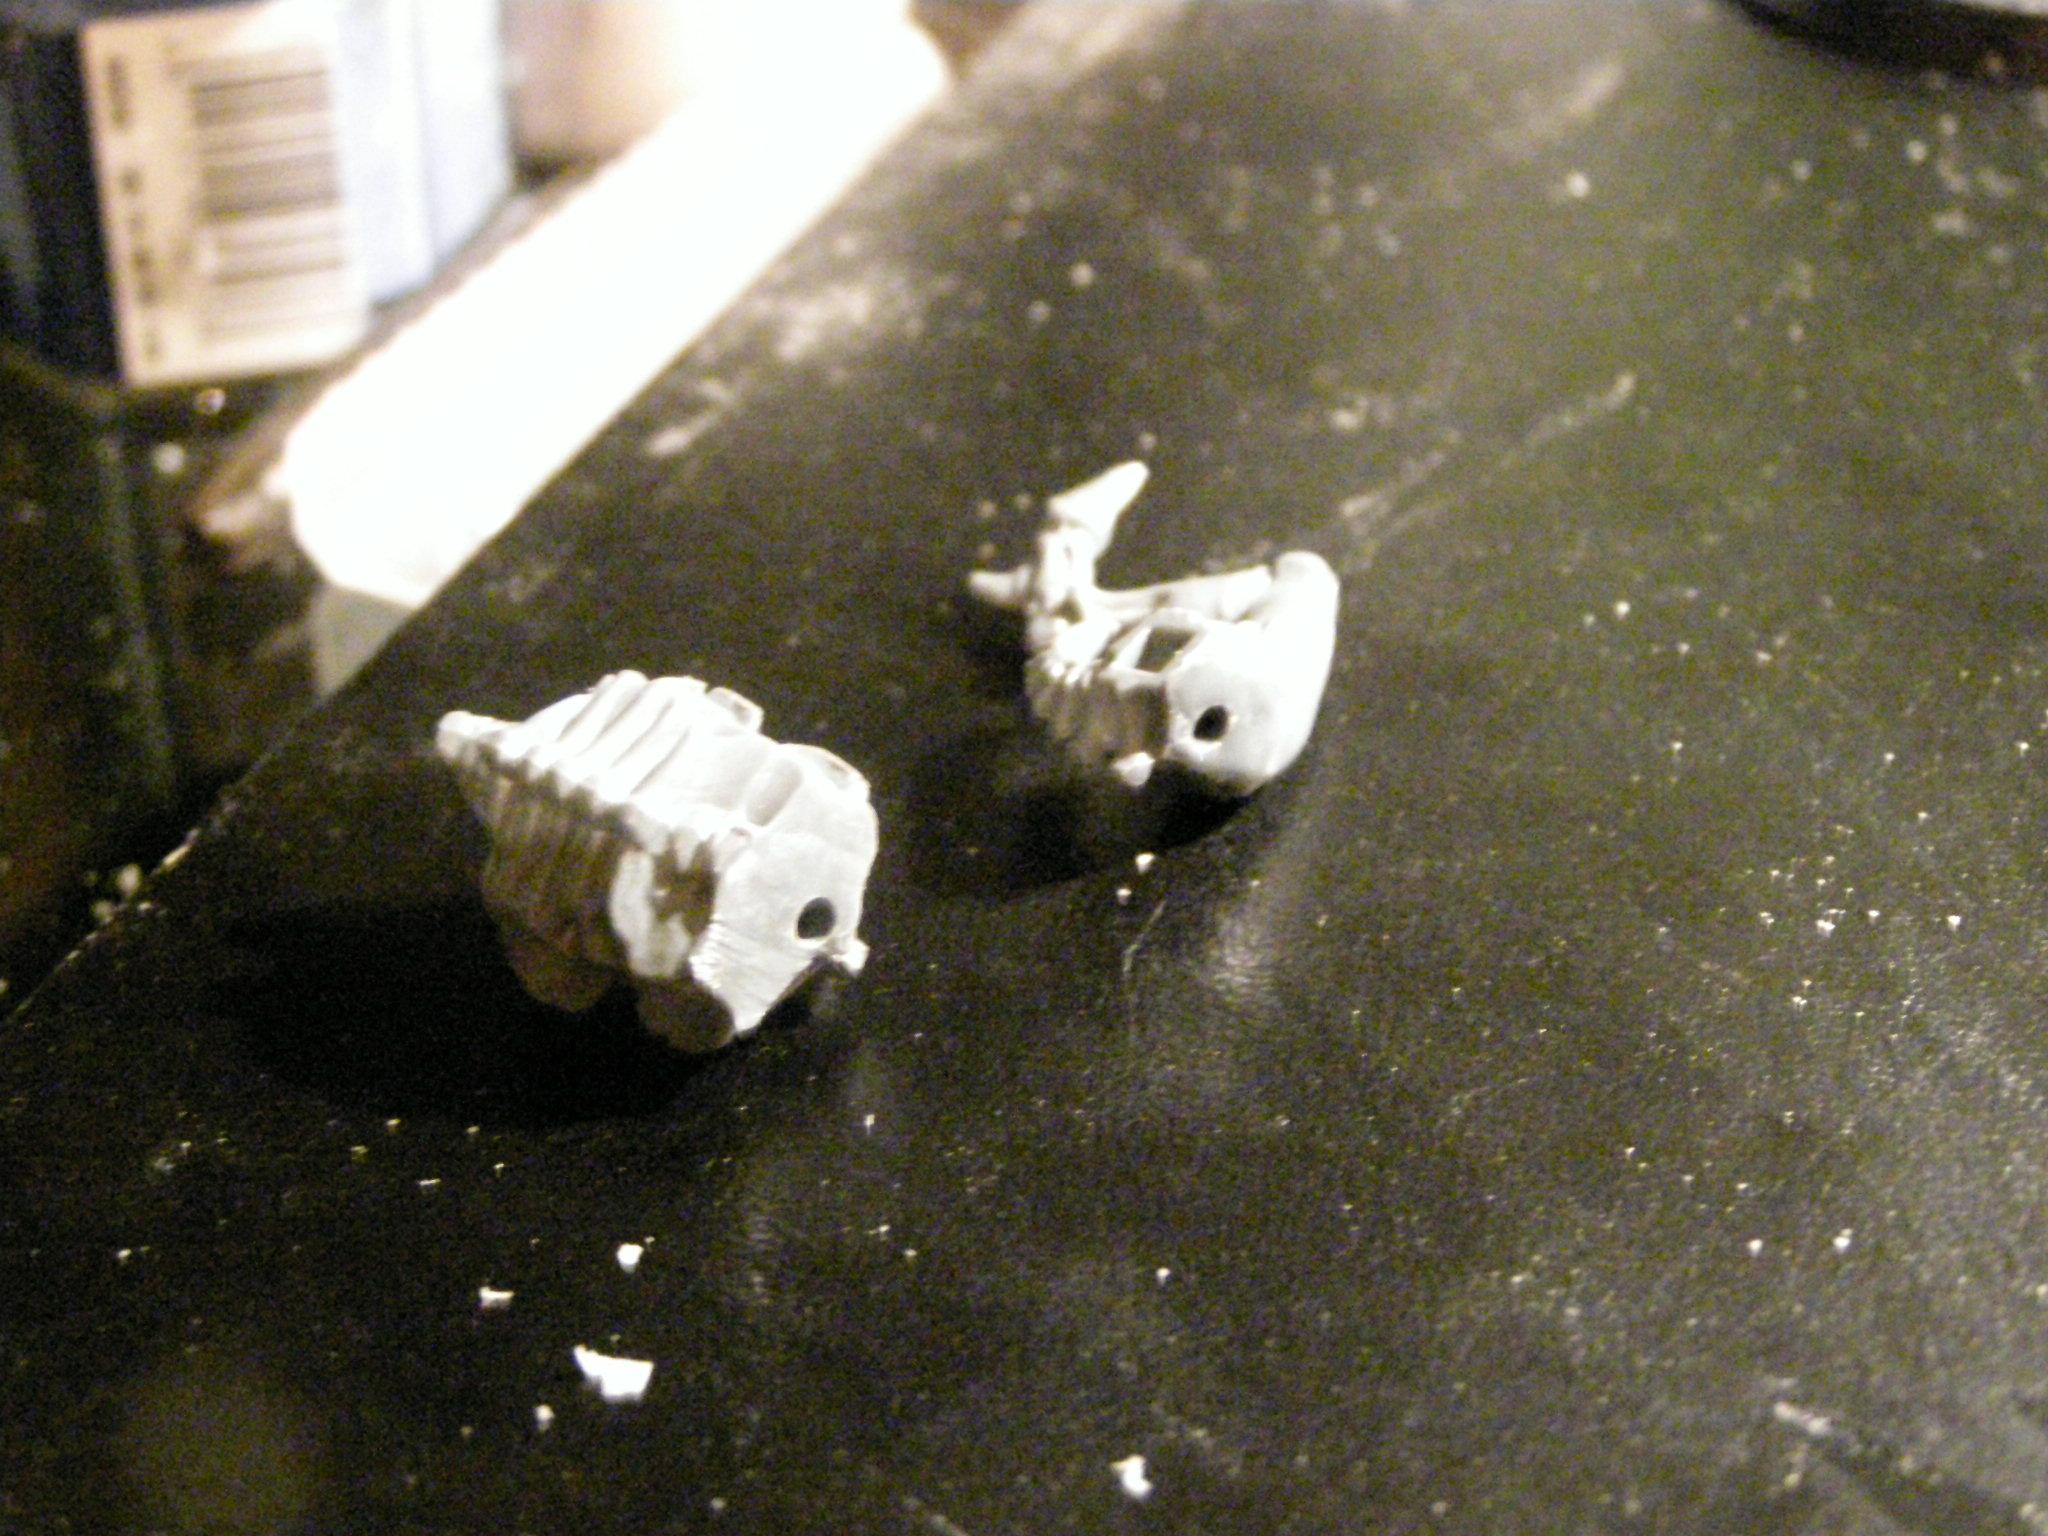 Conversion, Then drill a pin hole in the spine part of the legs and torso